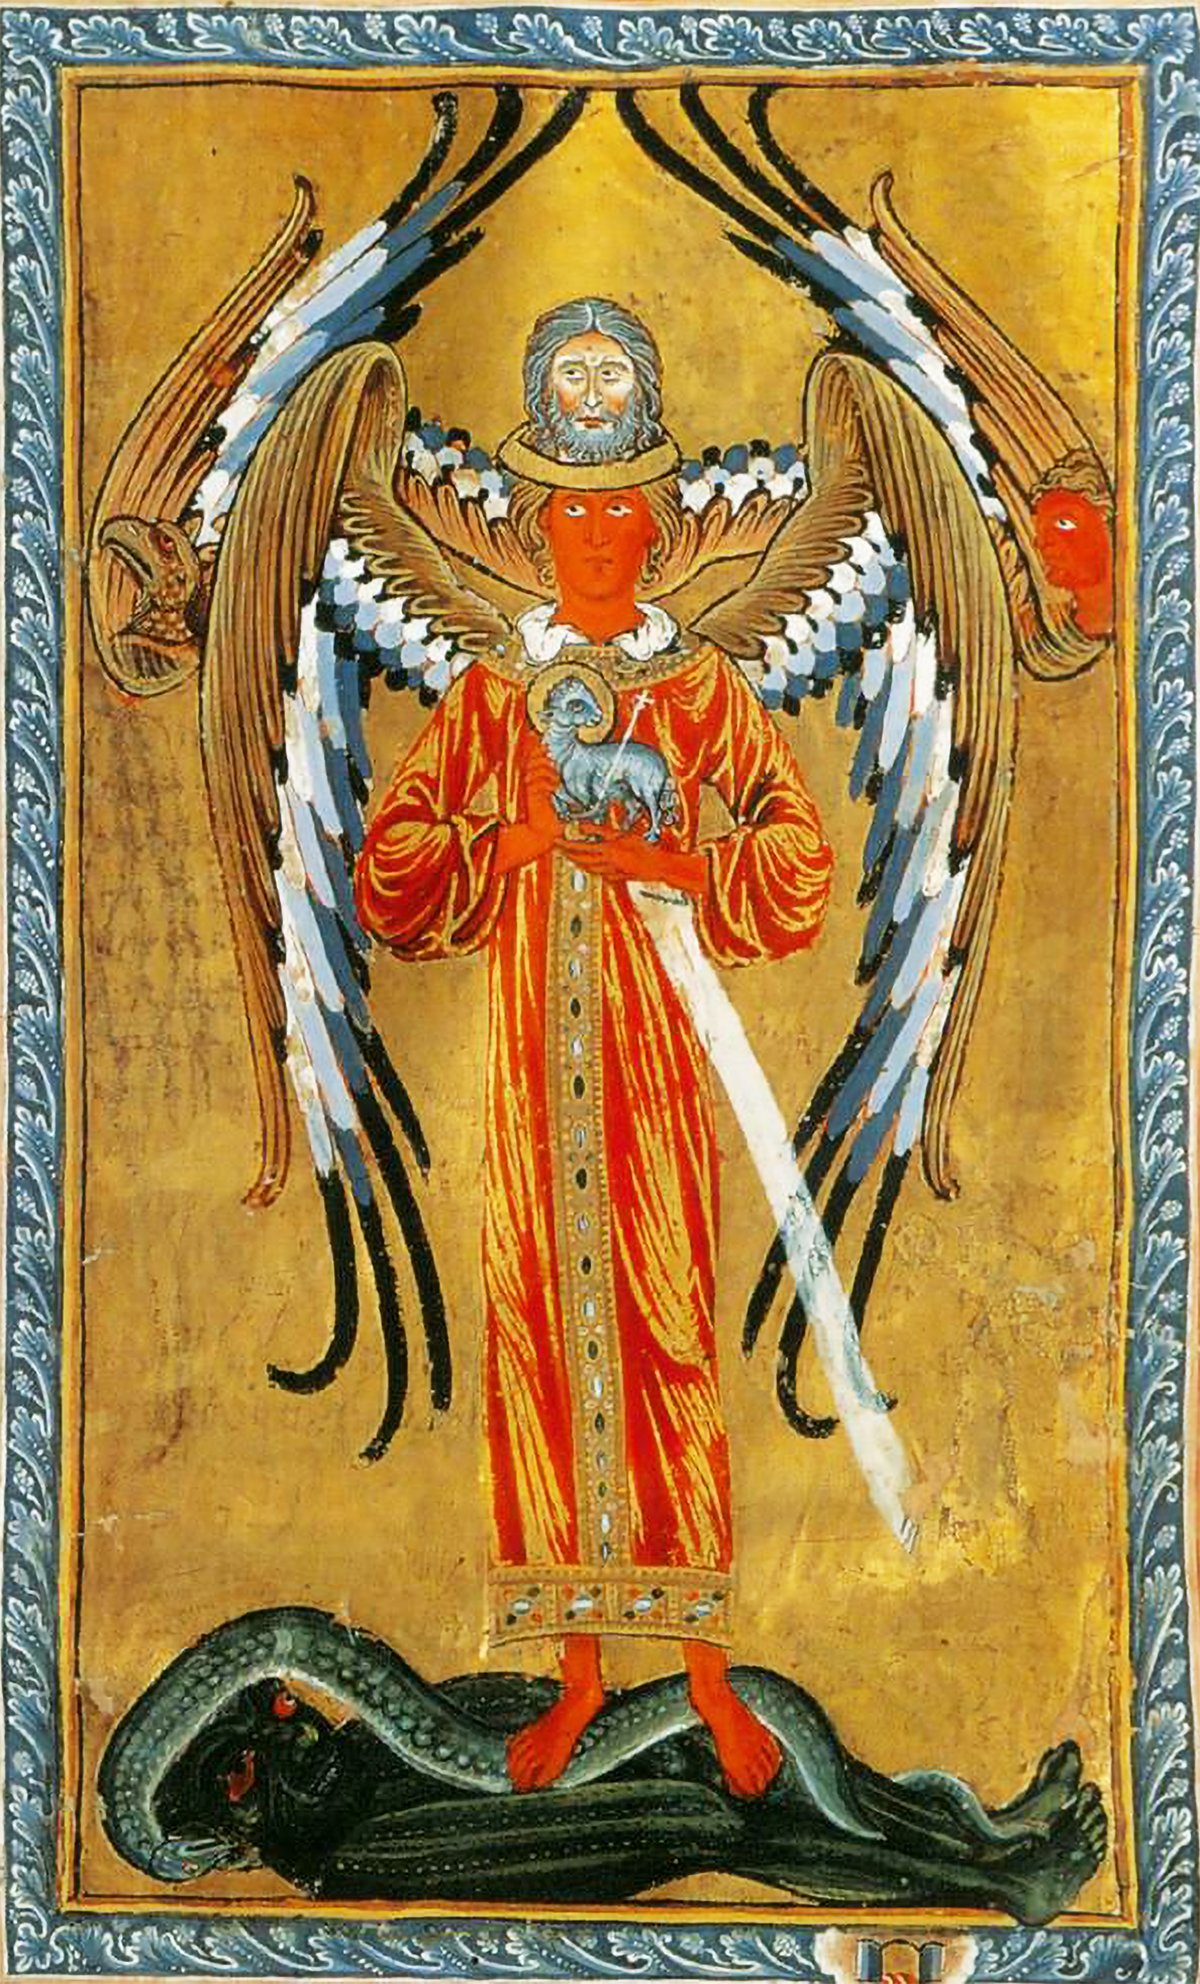 An illustration from Hildegard of Bingen's "Liber Divinorum Operum" (The Book of Divine Works) portraying her first vision.